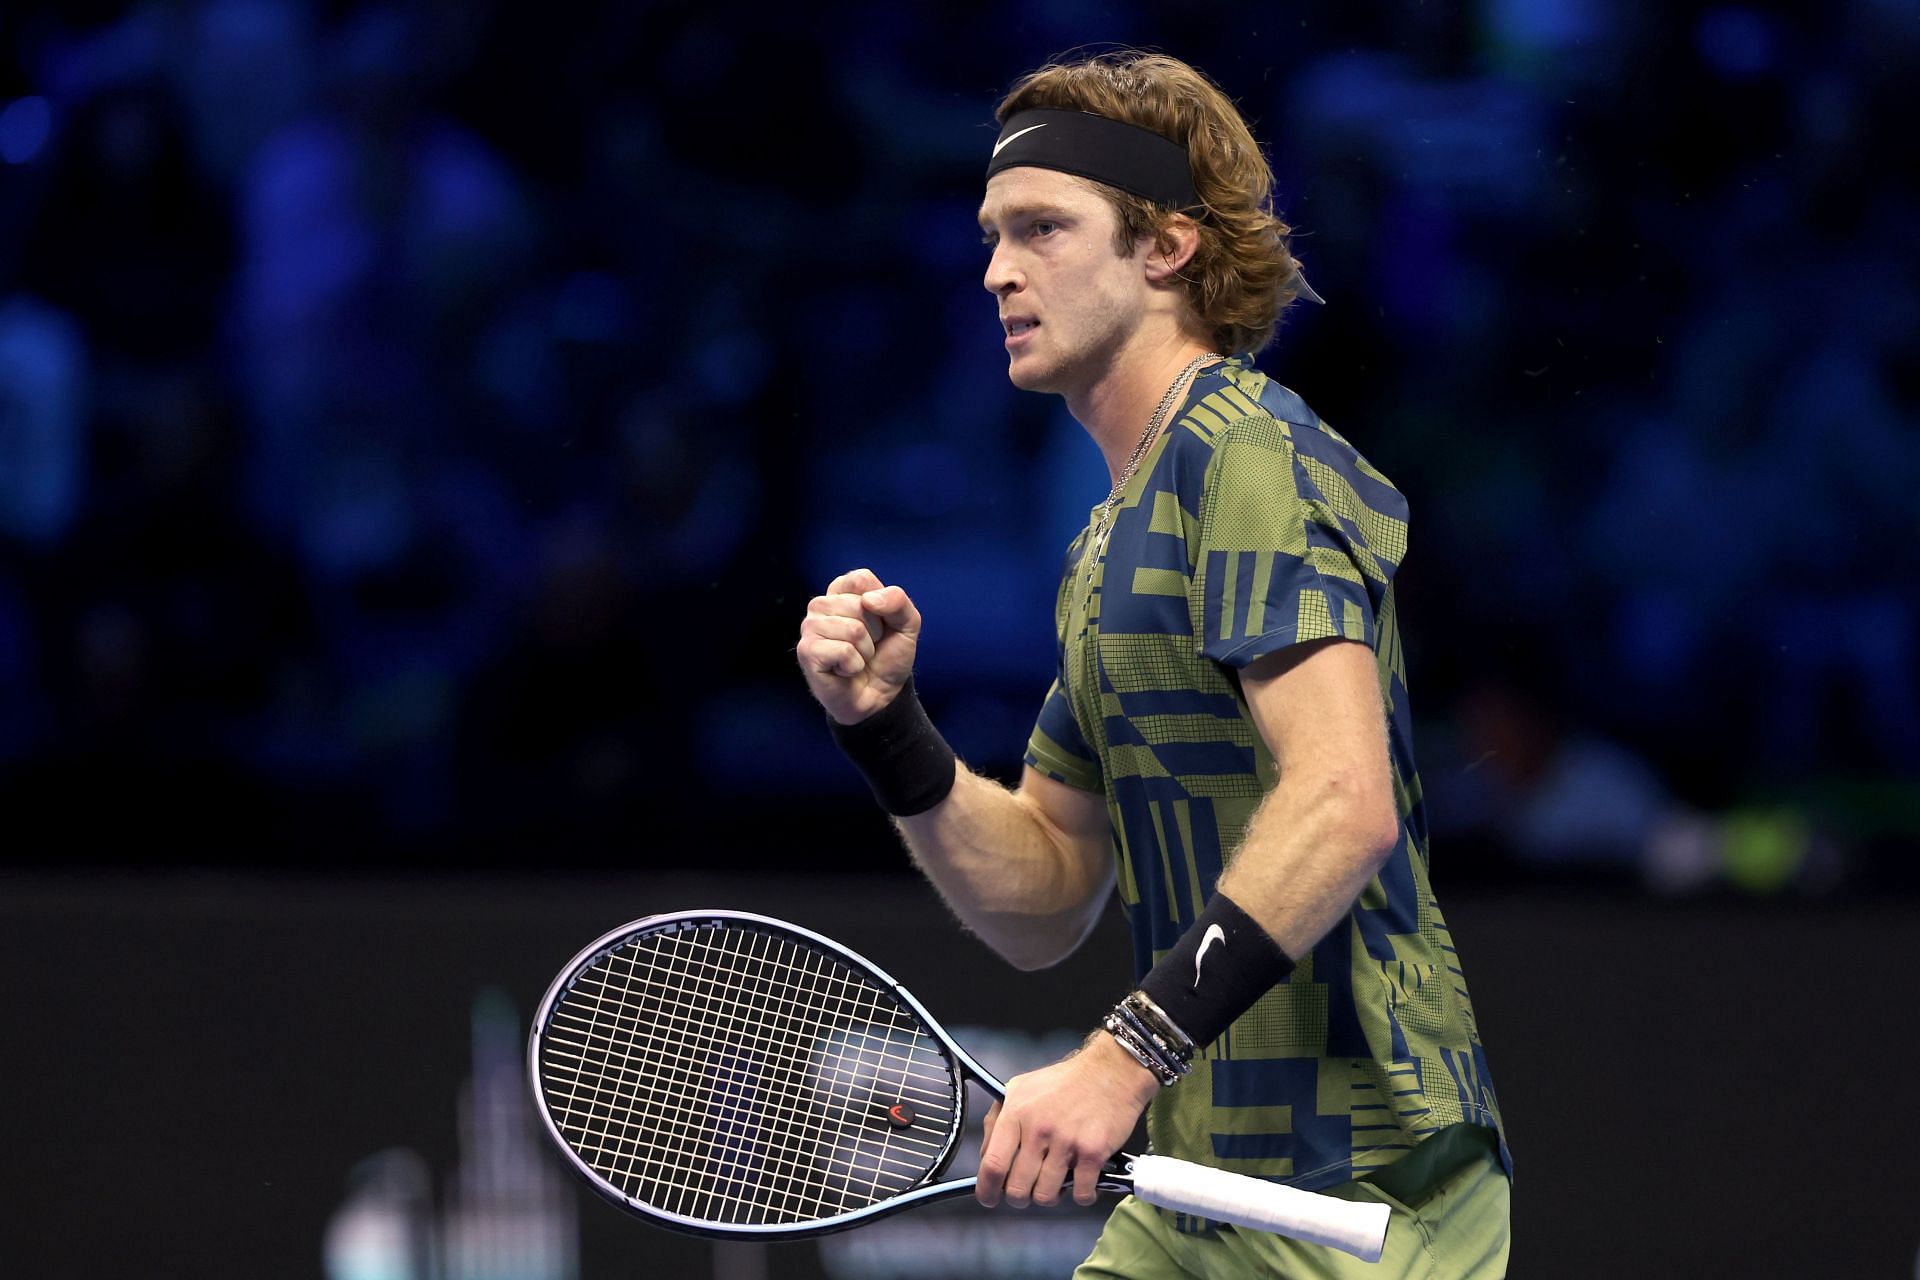 ATP Finals 2022 TV Schedule today When are Novak Djokovic, Daniil Medvedev and Stefanos Tsitsipas playing? Round robin, Day 4